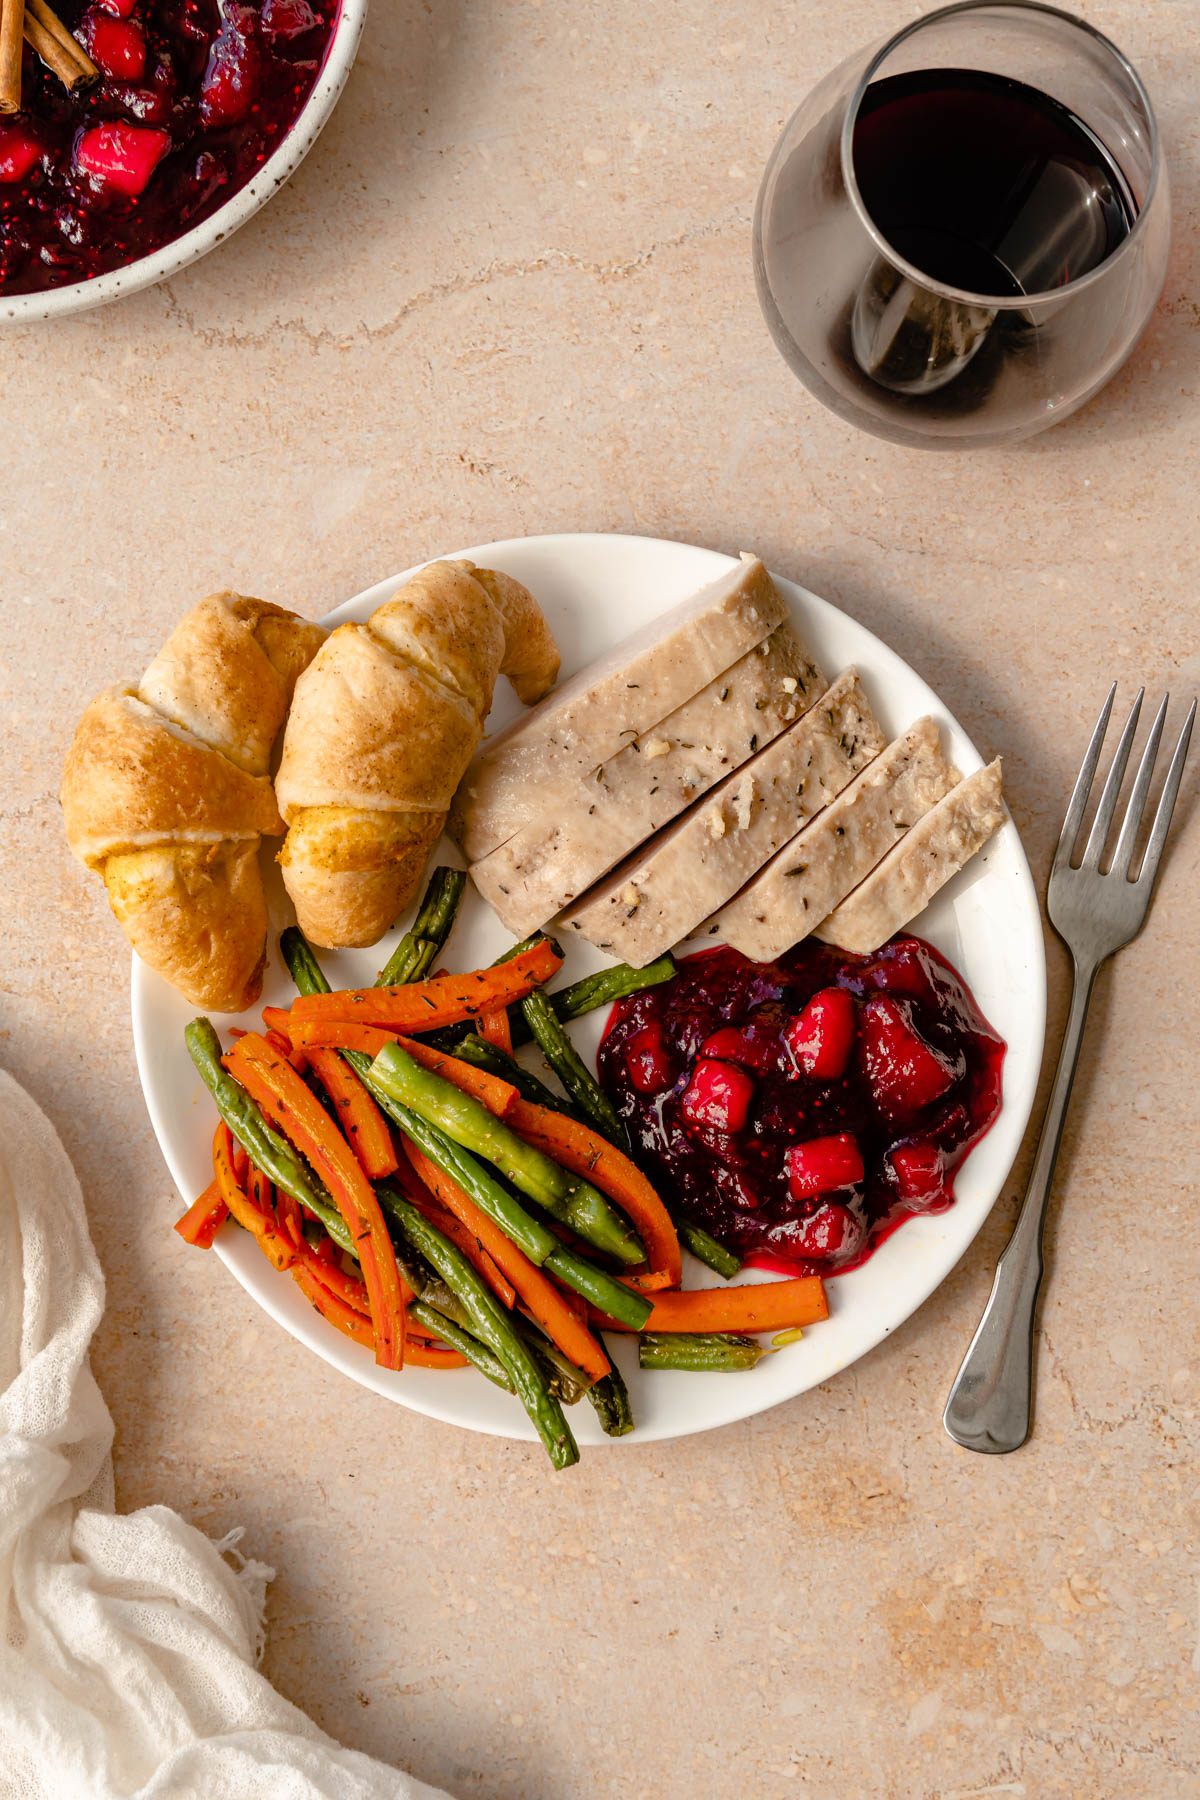 A plate of pumpkin rolls, turkey, roasted carrots and green beans, and cranberry sauce with wine and a fork on the side.